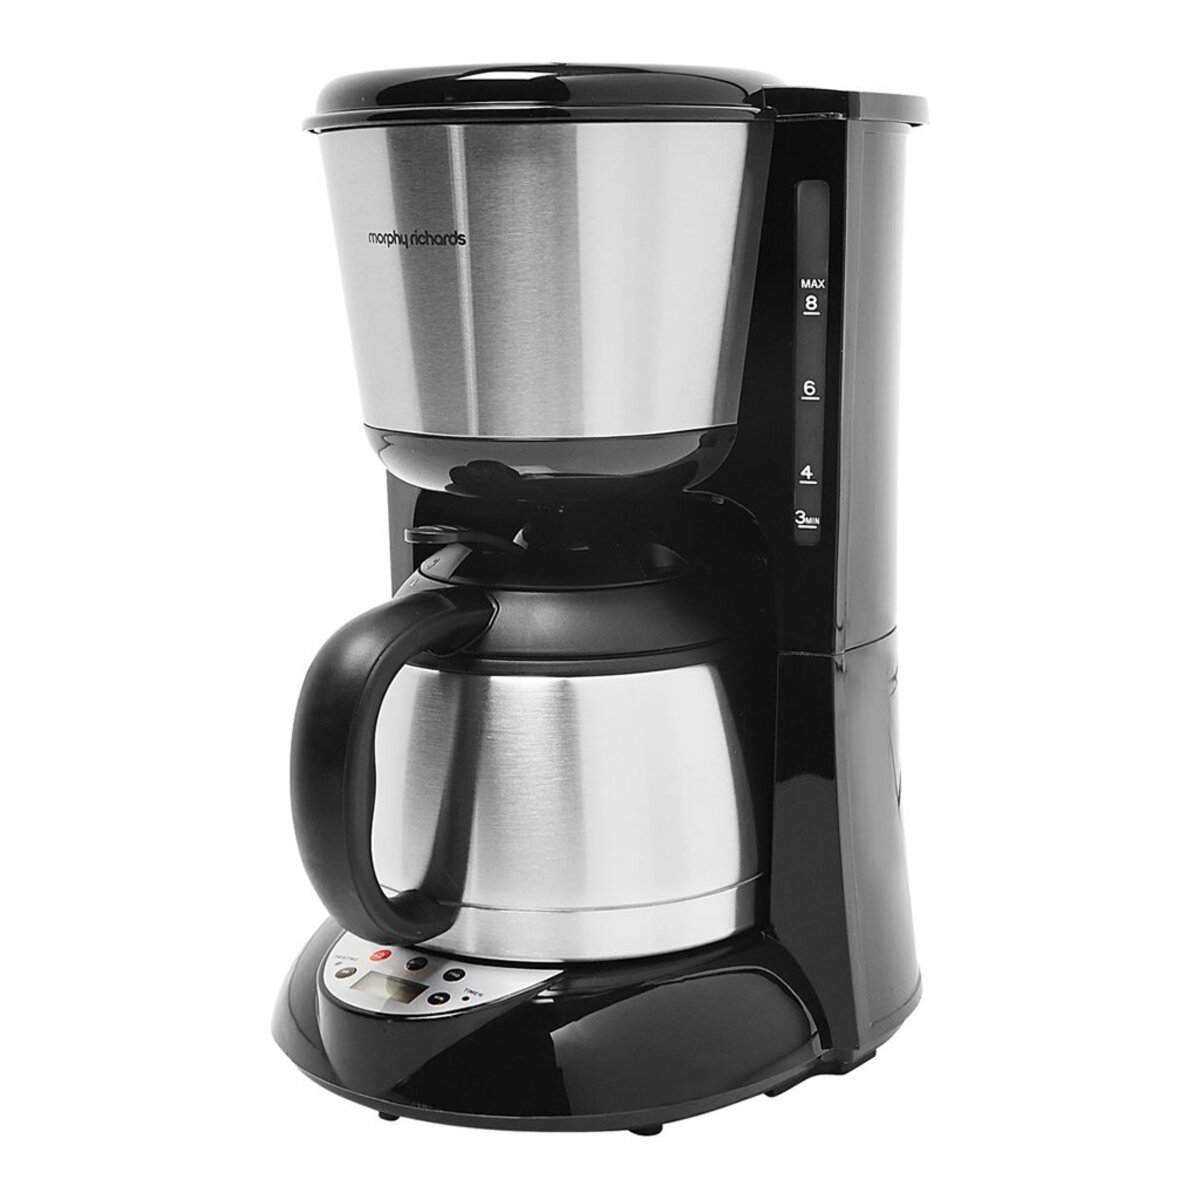 Morphy Richards Cafetière Isotherme Accents Thermos Programmable Inox 800W  1L M162771EE - La Poste